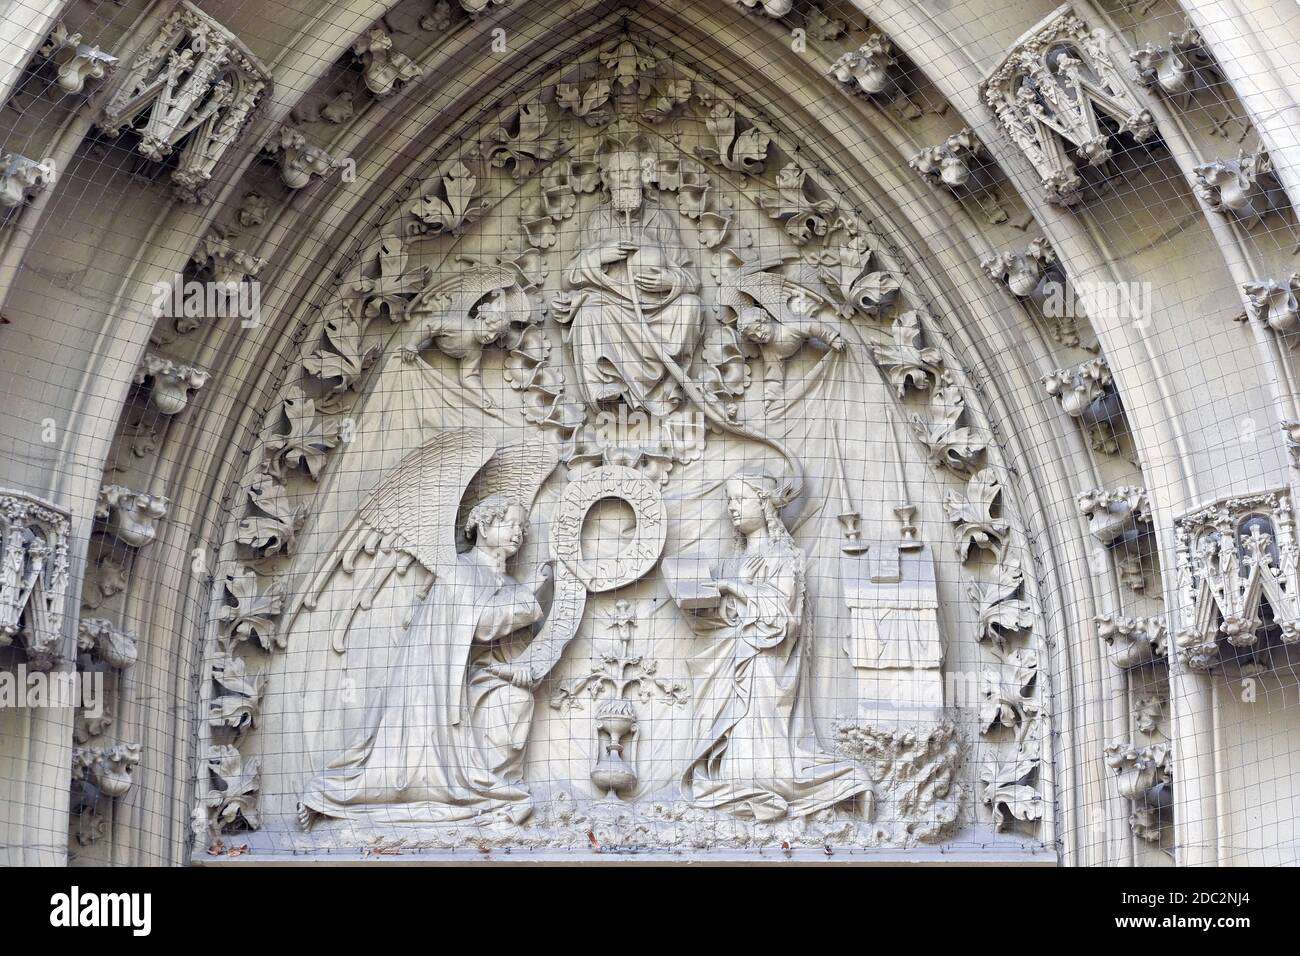 The tympanum shows the Annunciation to Mary, portal of the Marienkapelle in Wurzburg, Bavaria, Germany Stock Photo